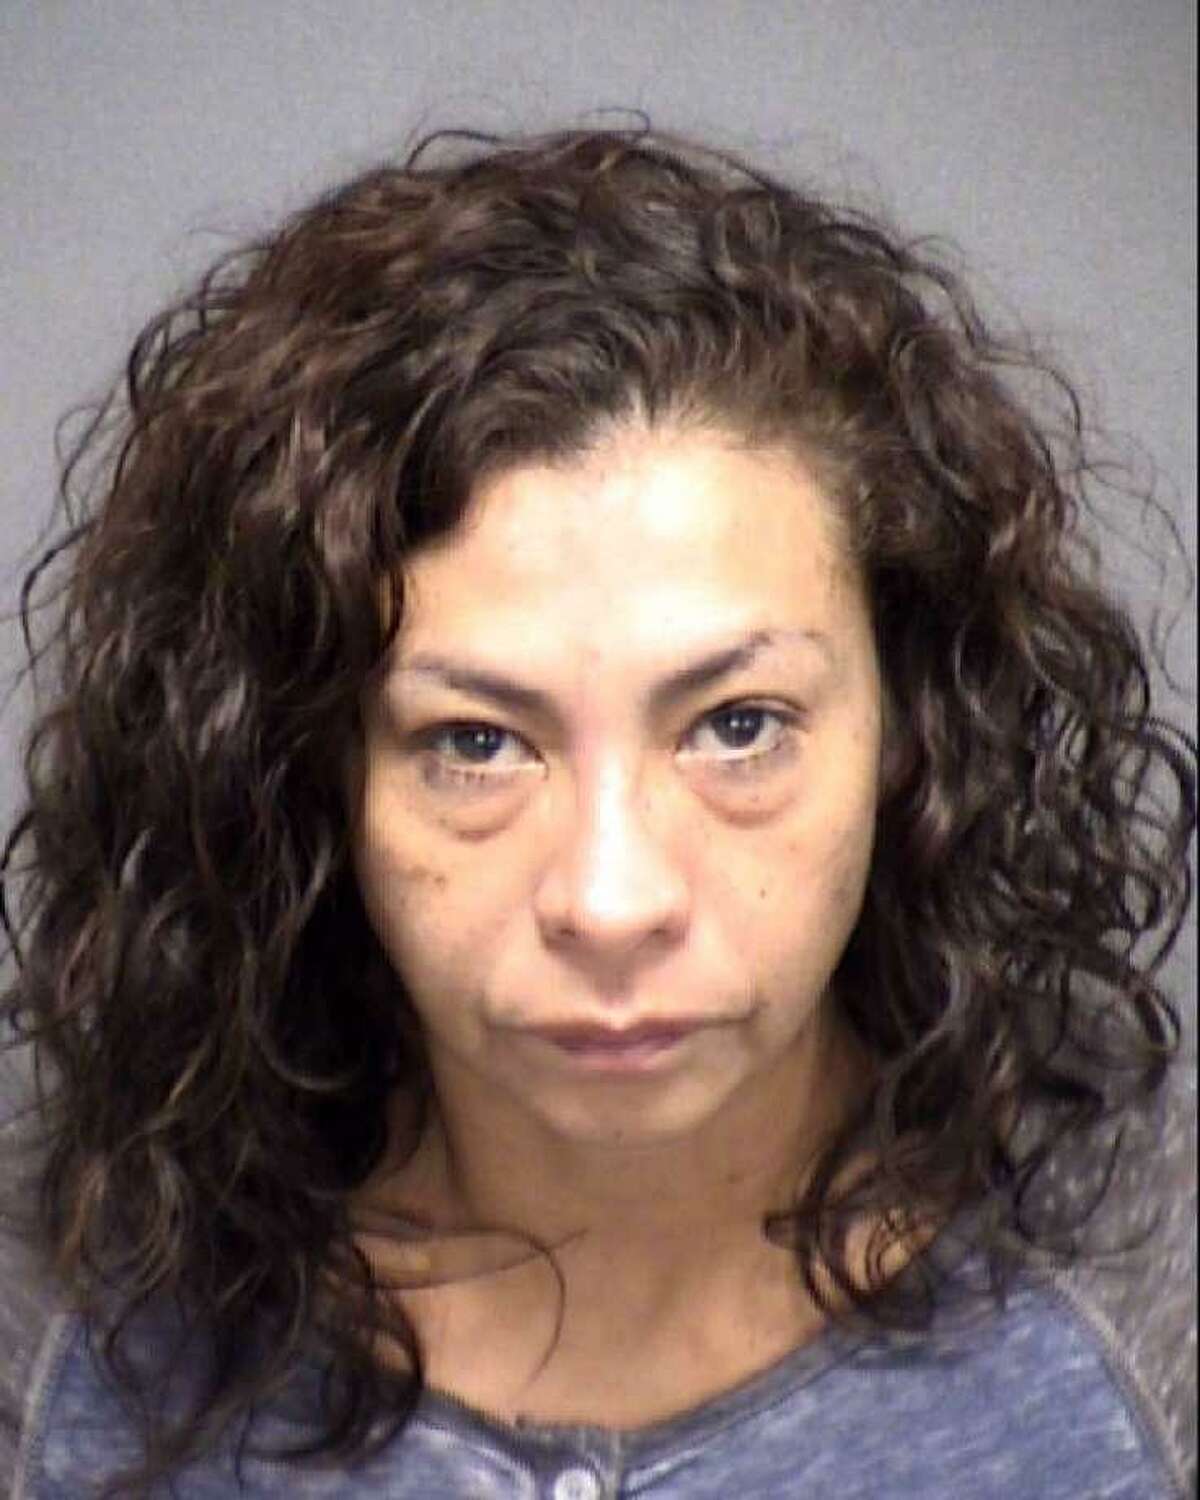 Angie Torres, 45, was indicted Wednesday, accused of helping to cover up King Jay Davila’s death. She is the cousin on Christopher Davila, who is charged in the baby’s death.